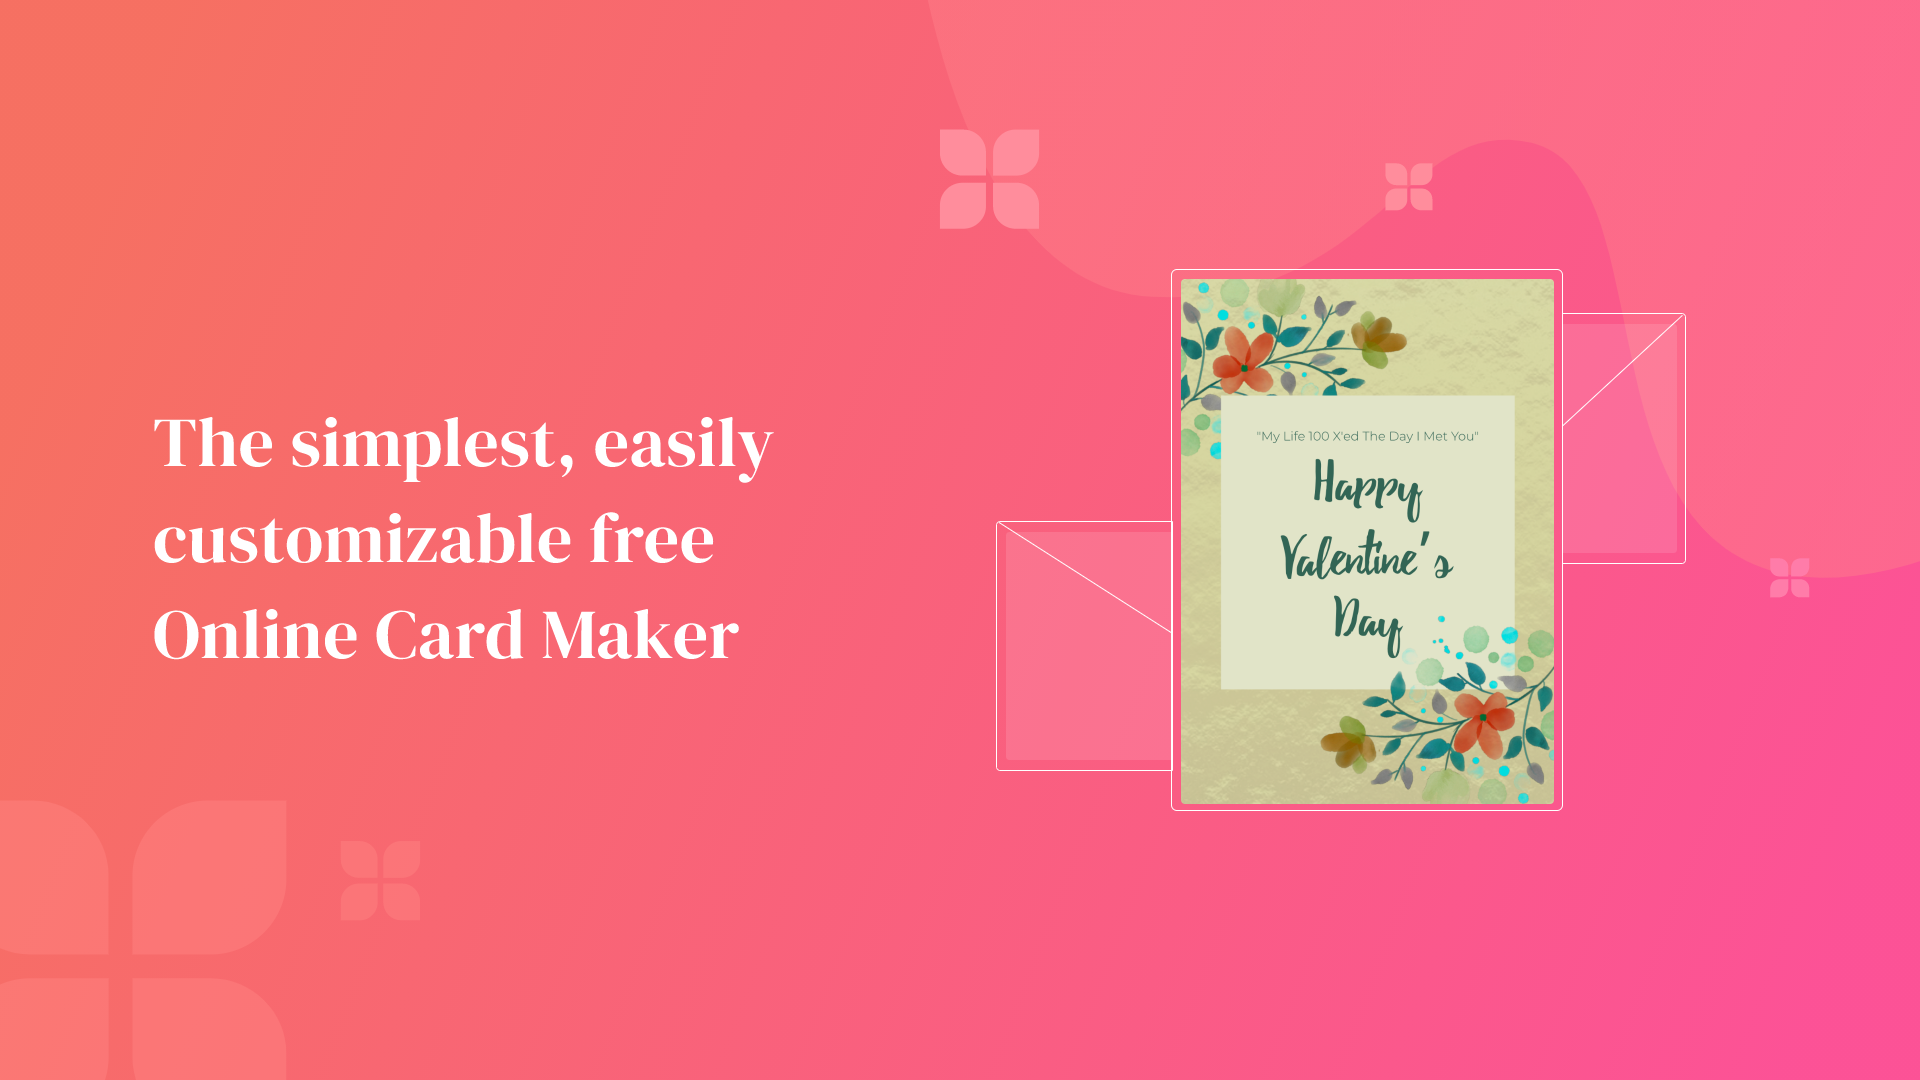 Free Online Card Maker Create Custom Cards With Picmaker